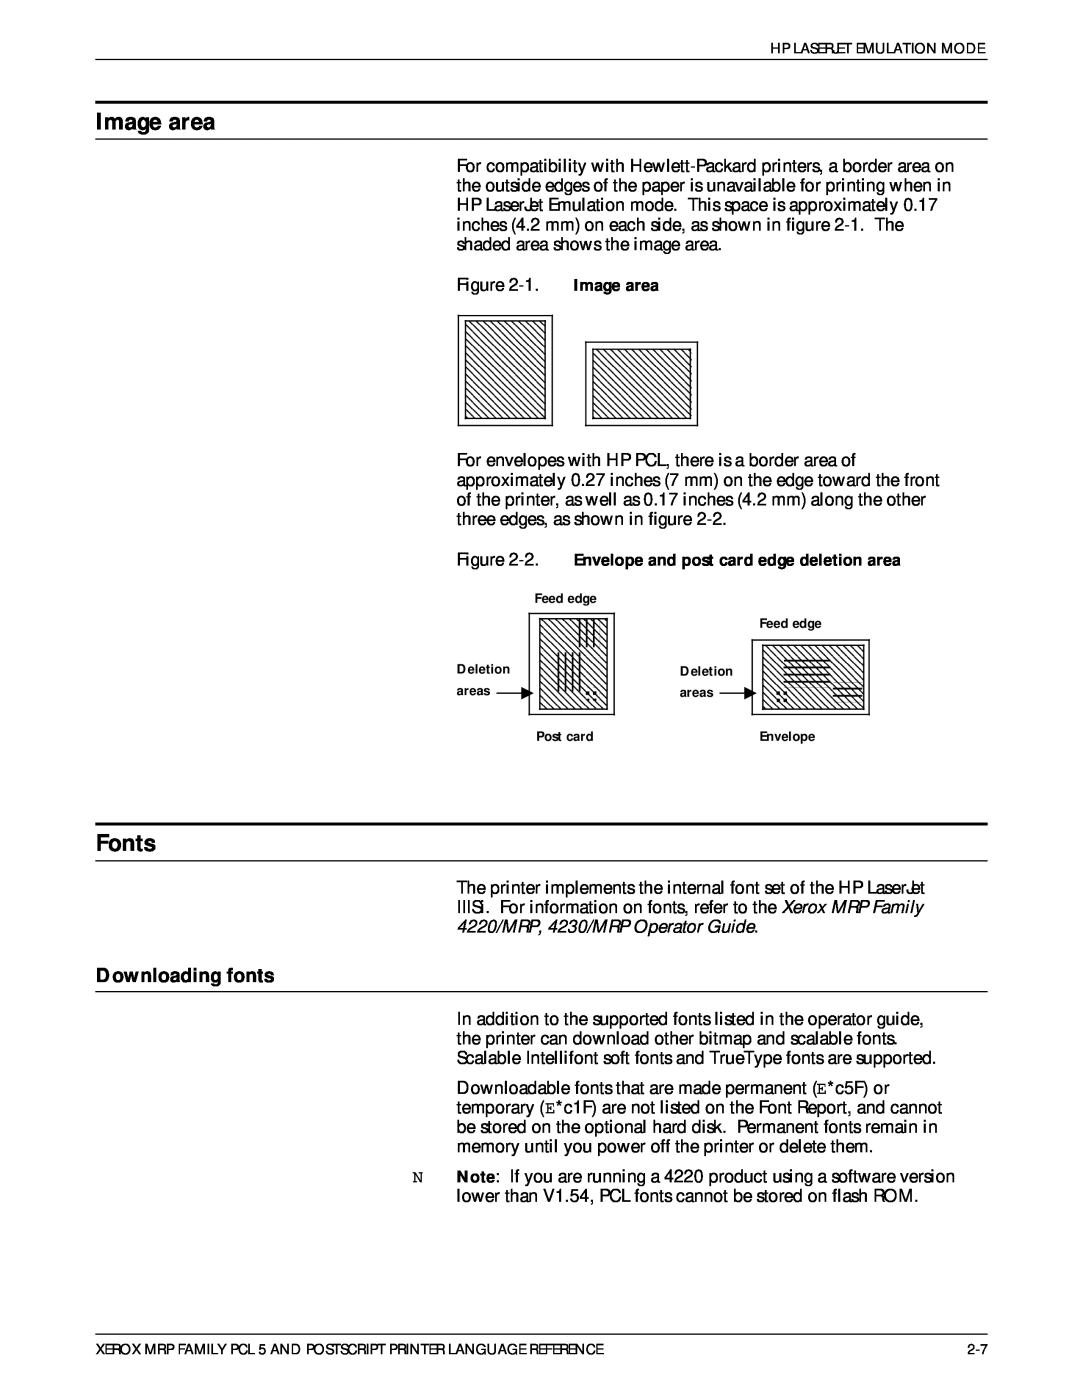 Xerox 4215/MRP manual Image area, Fonts, Downloading fonts 